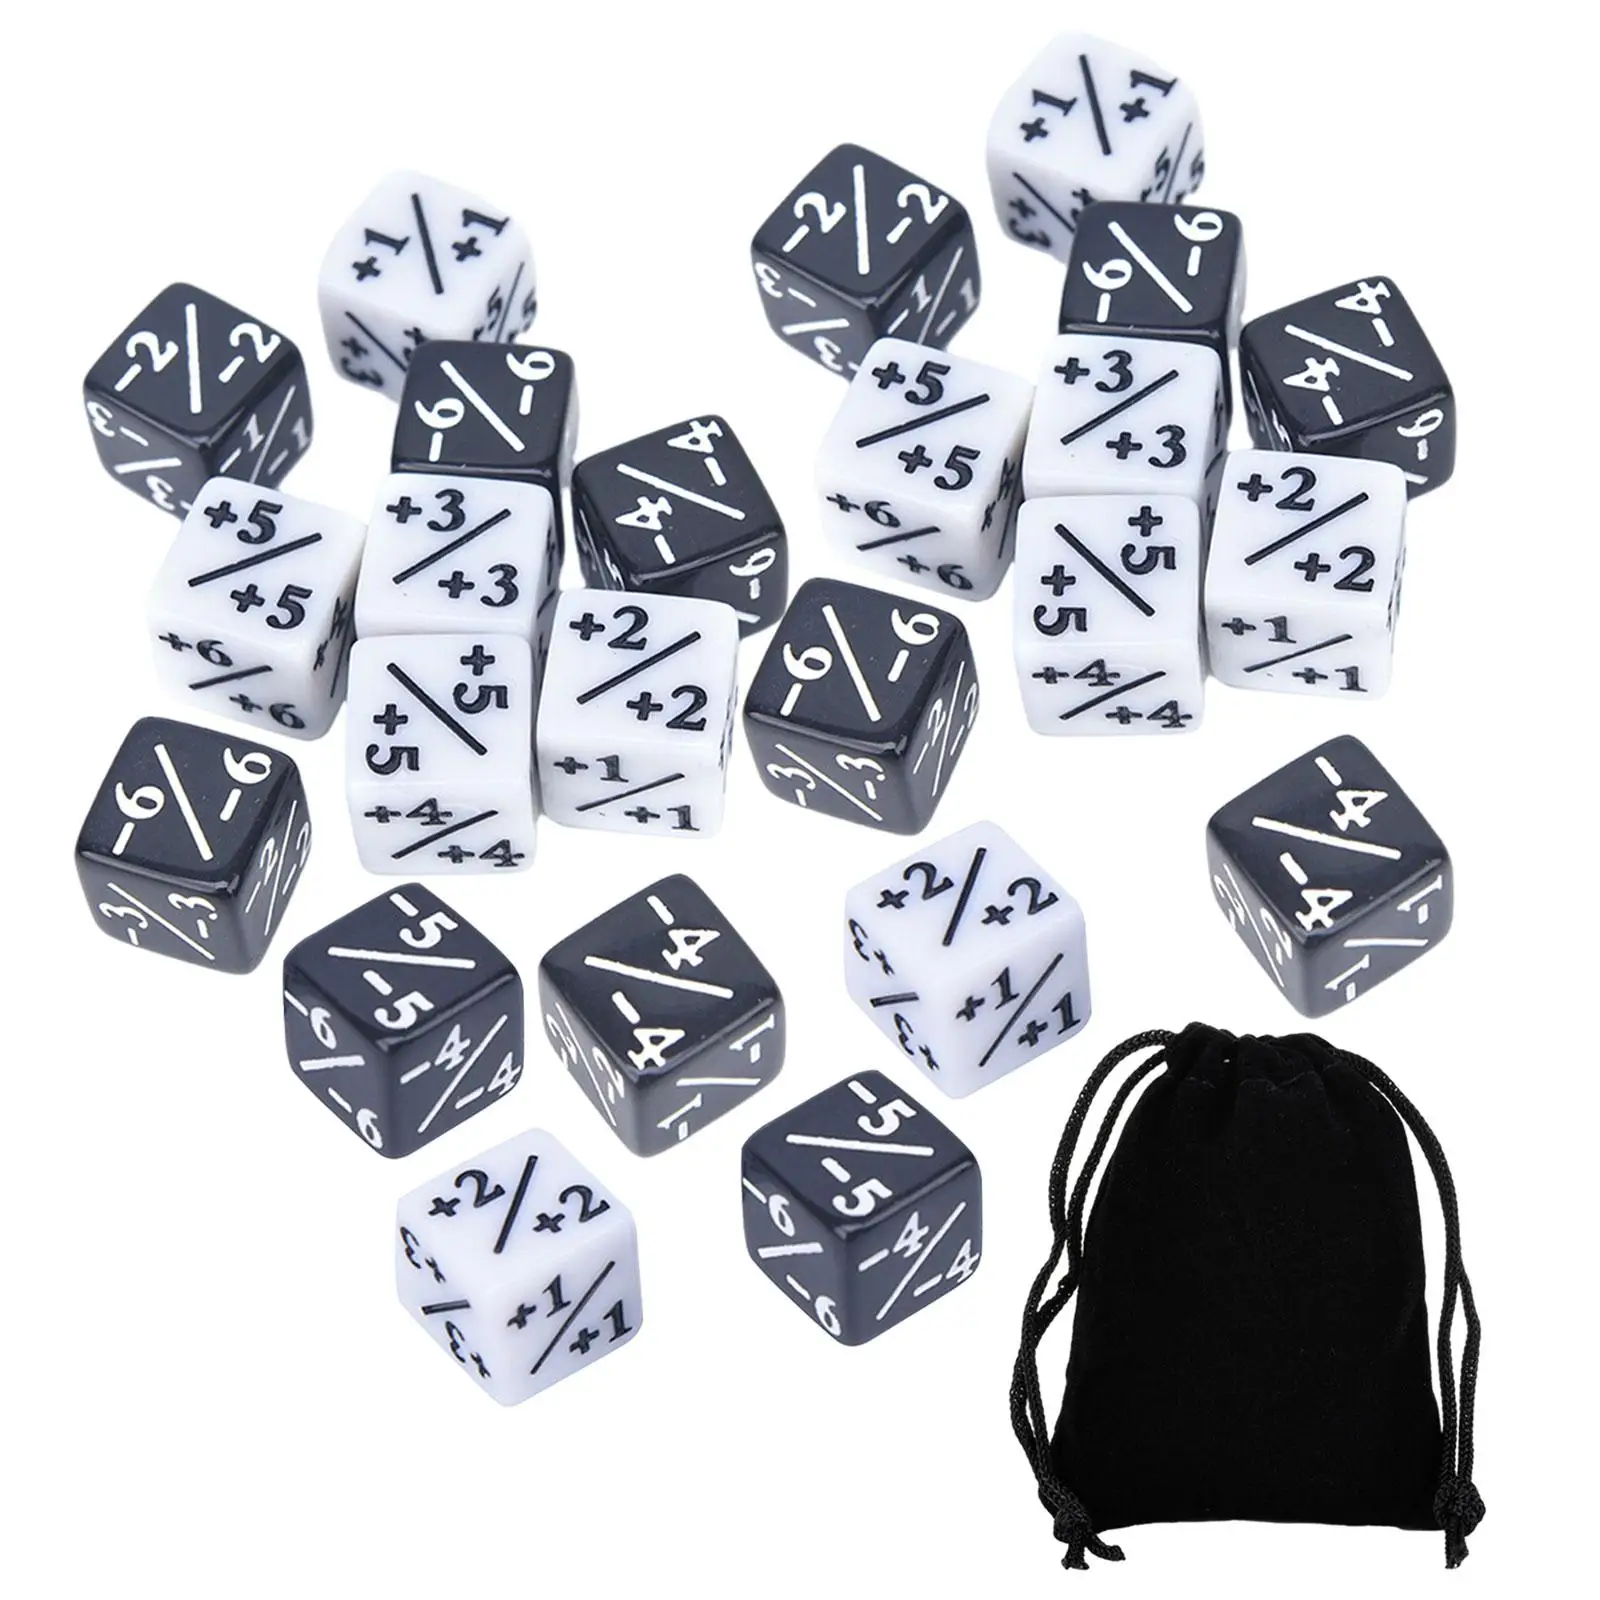 24x Counter Token Dice Table Game Dices Math Teaching for Teaching Props Card Gaming Accessory Role Play Preschool Children Toys